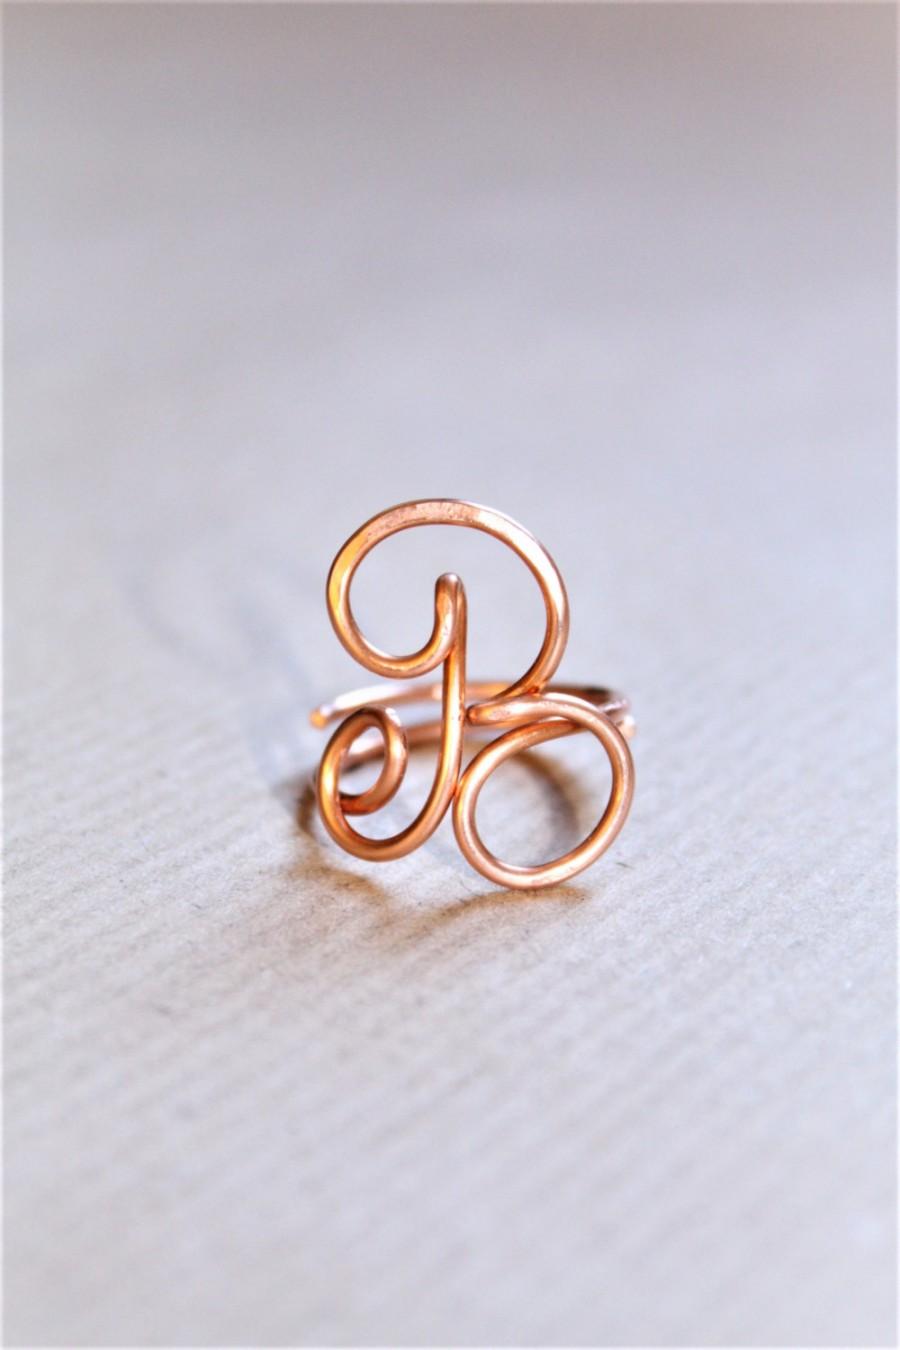 Wedding - Initial ring, letter A B F ring, personalized wire initial ring, wire ring, personalized ring, adjustable ring, wire letters, letter ring